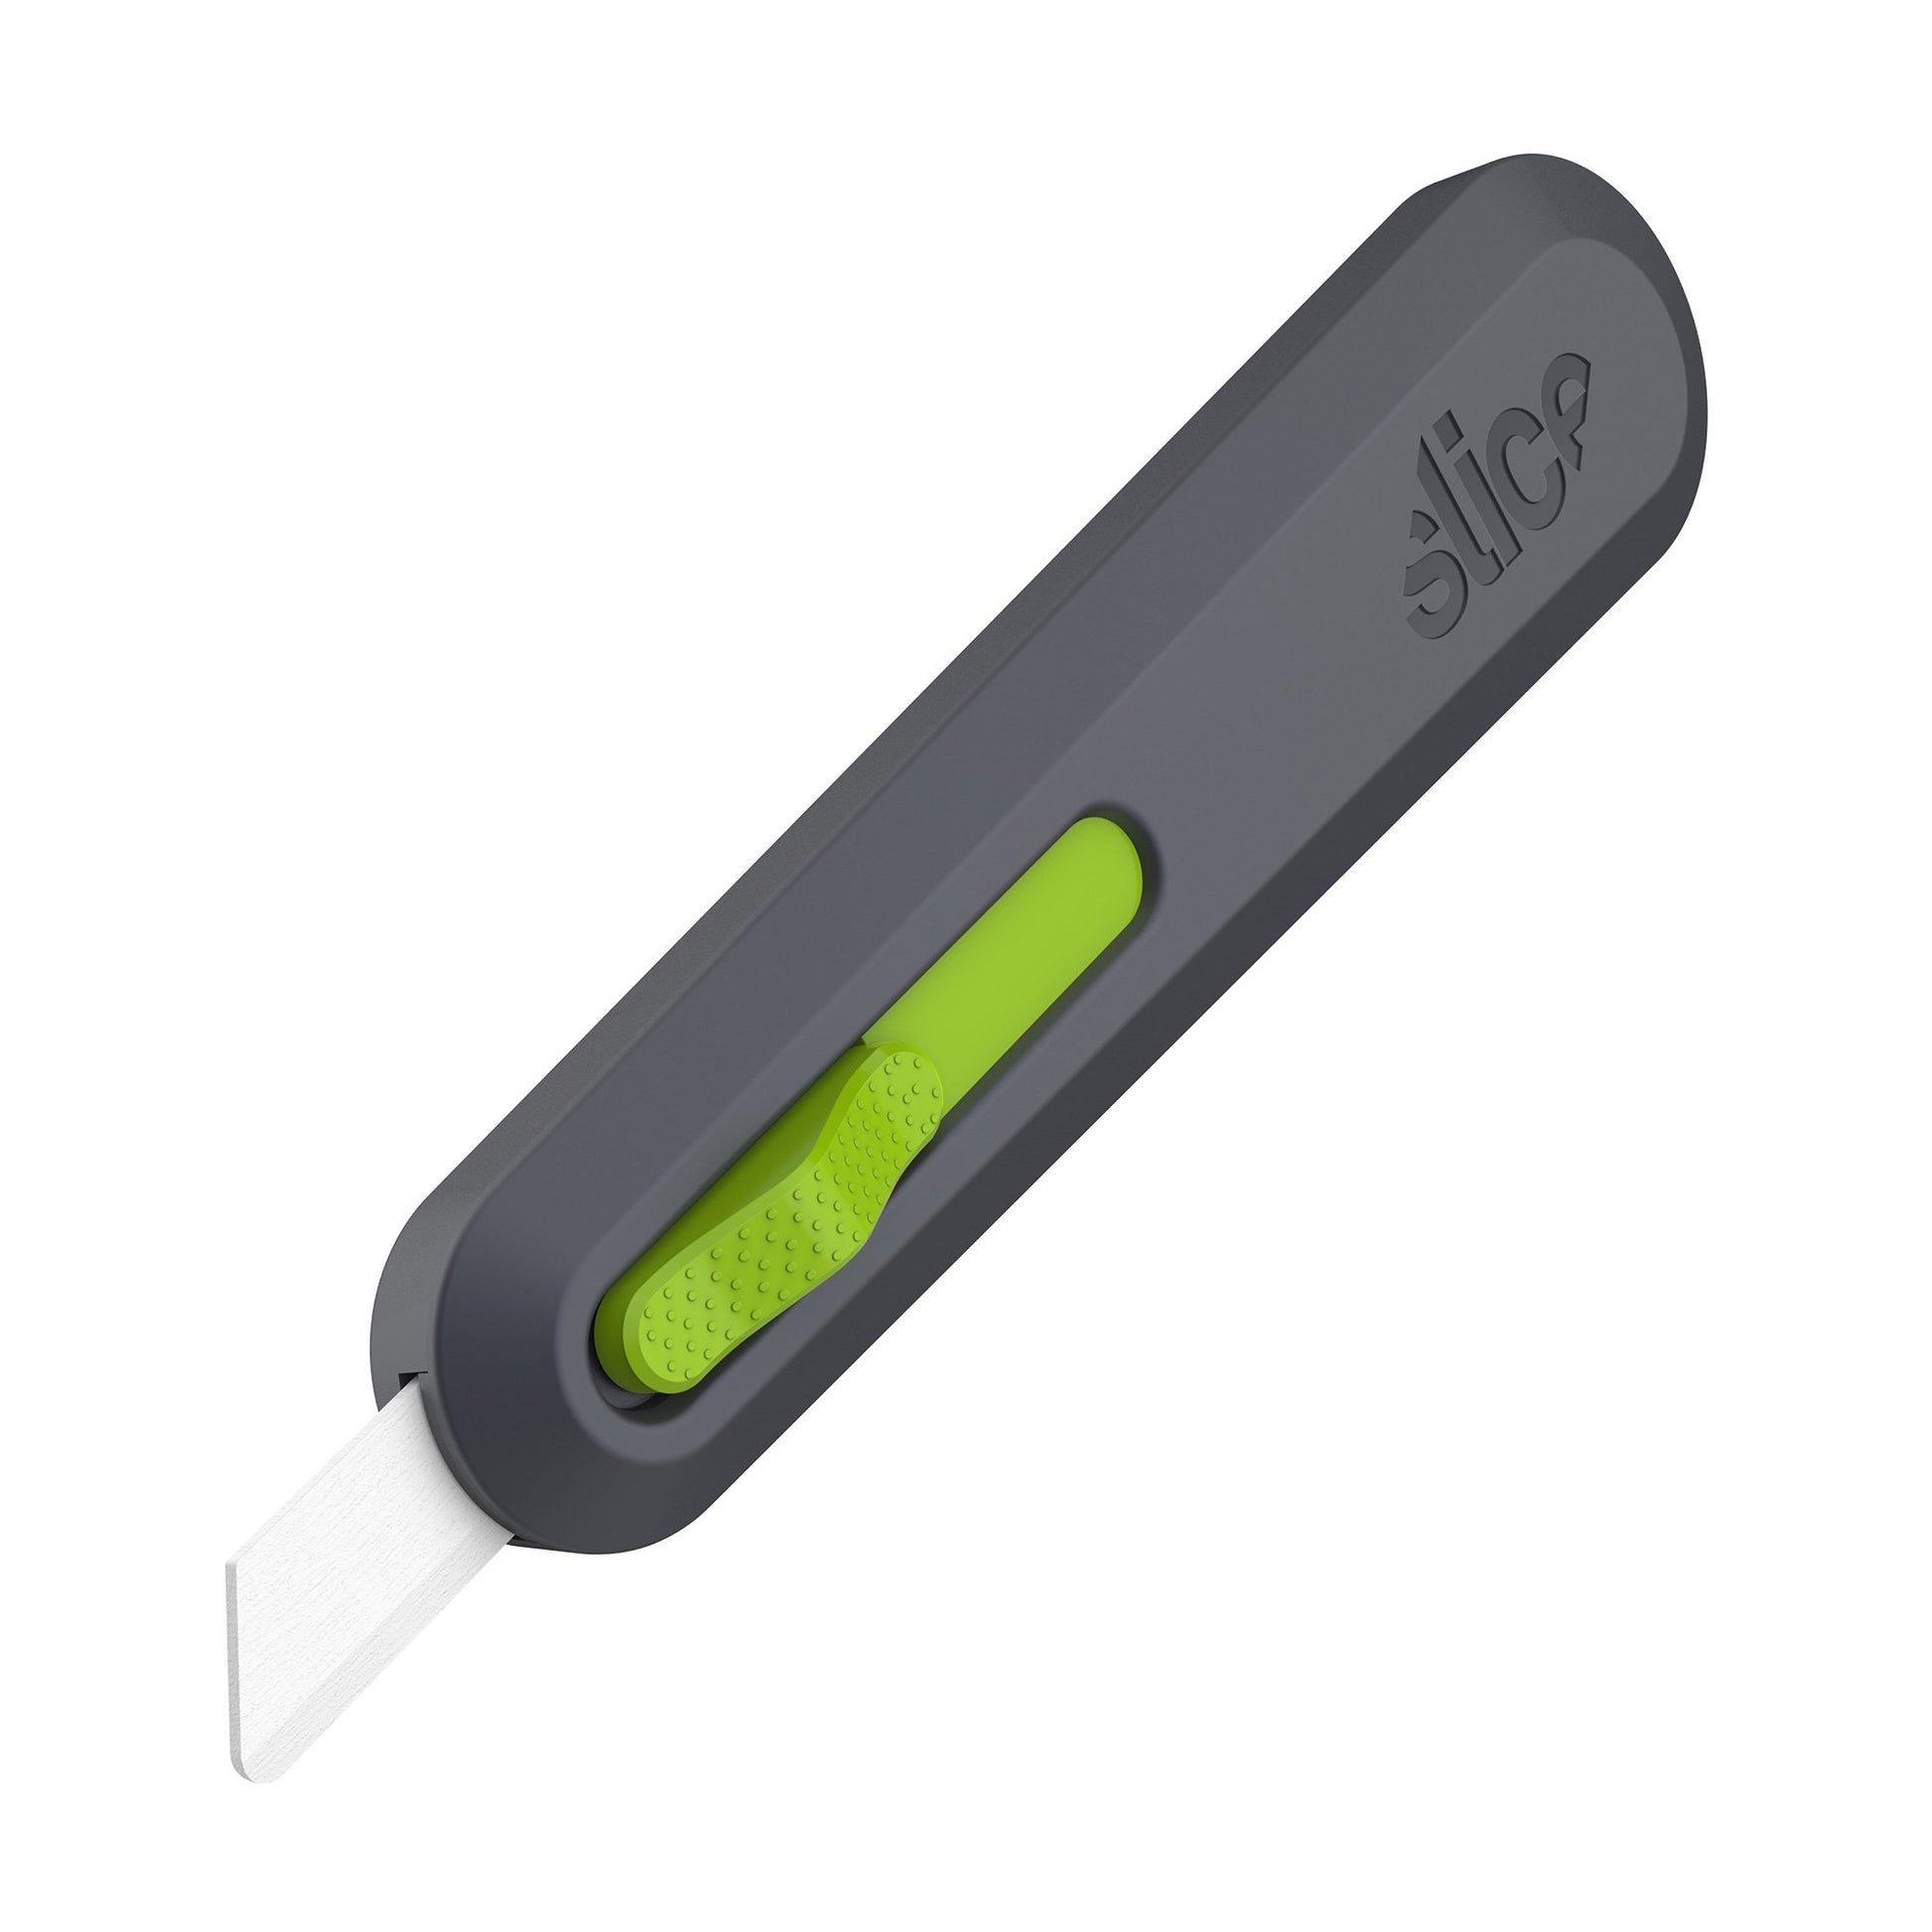 The Slice® 10554 Auto-Retractable Utility Knife with safety blade